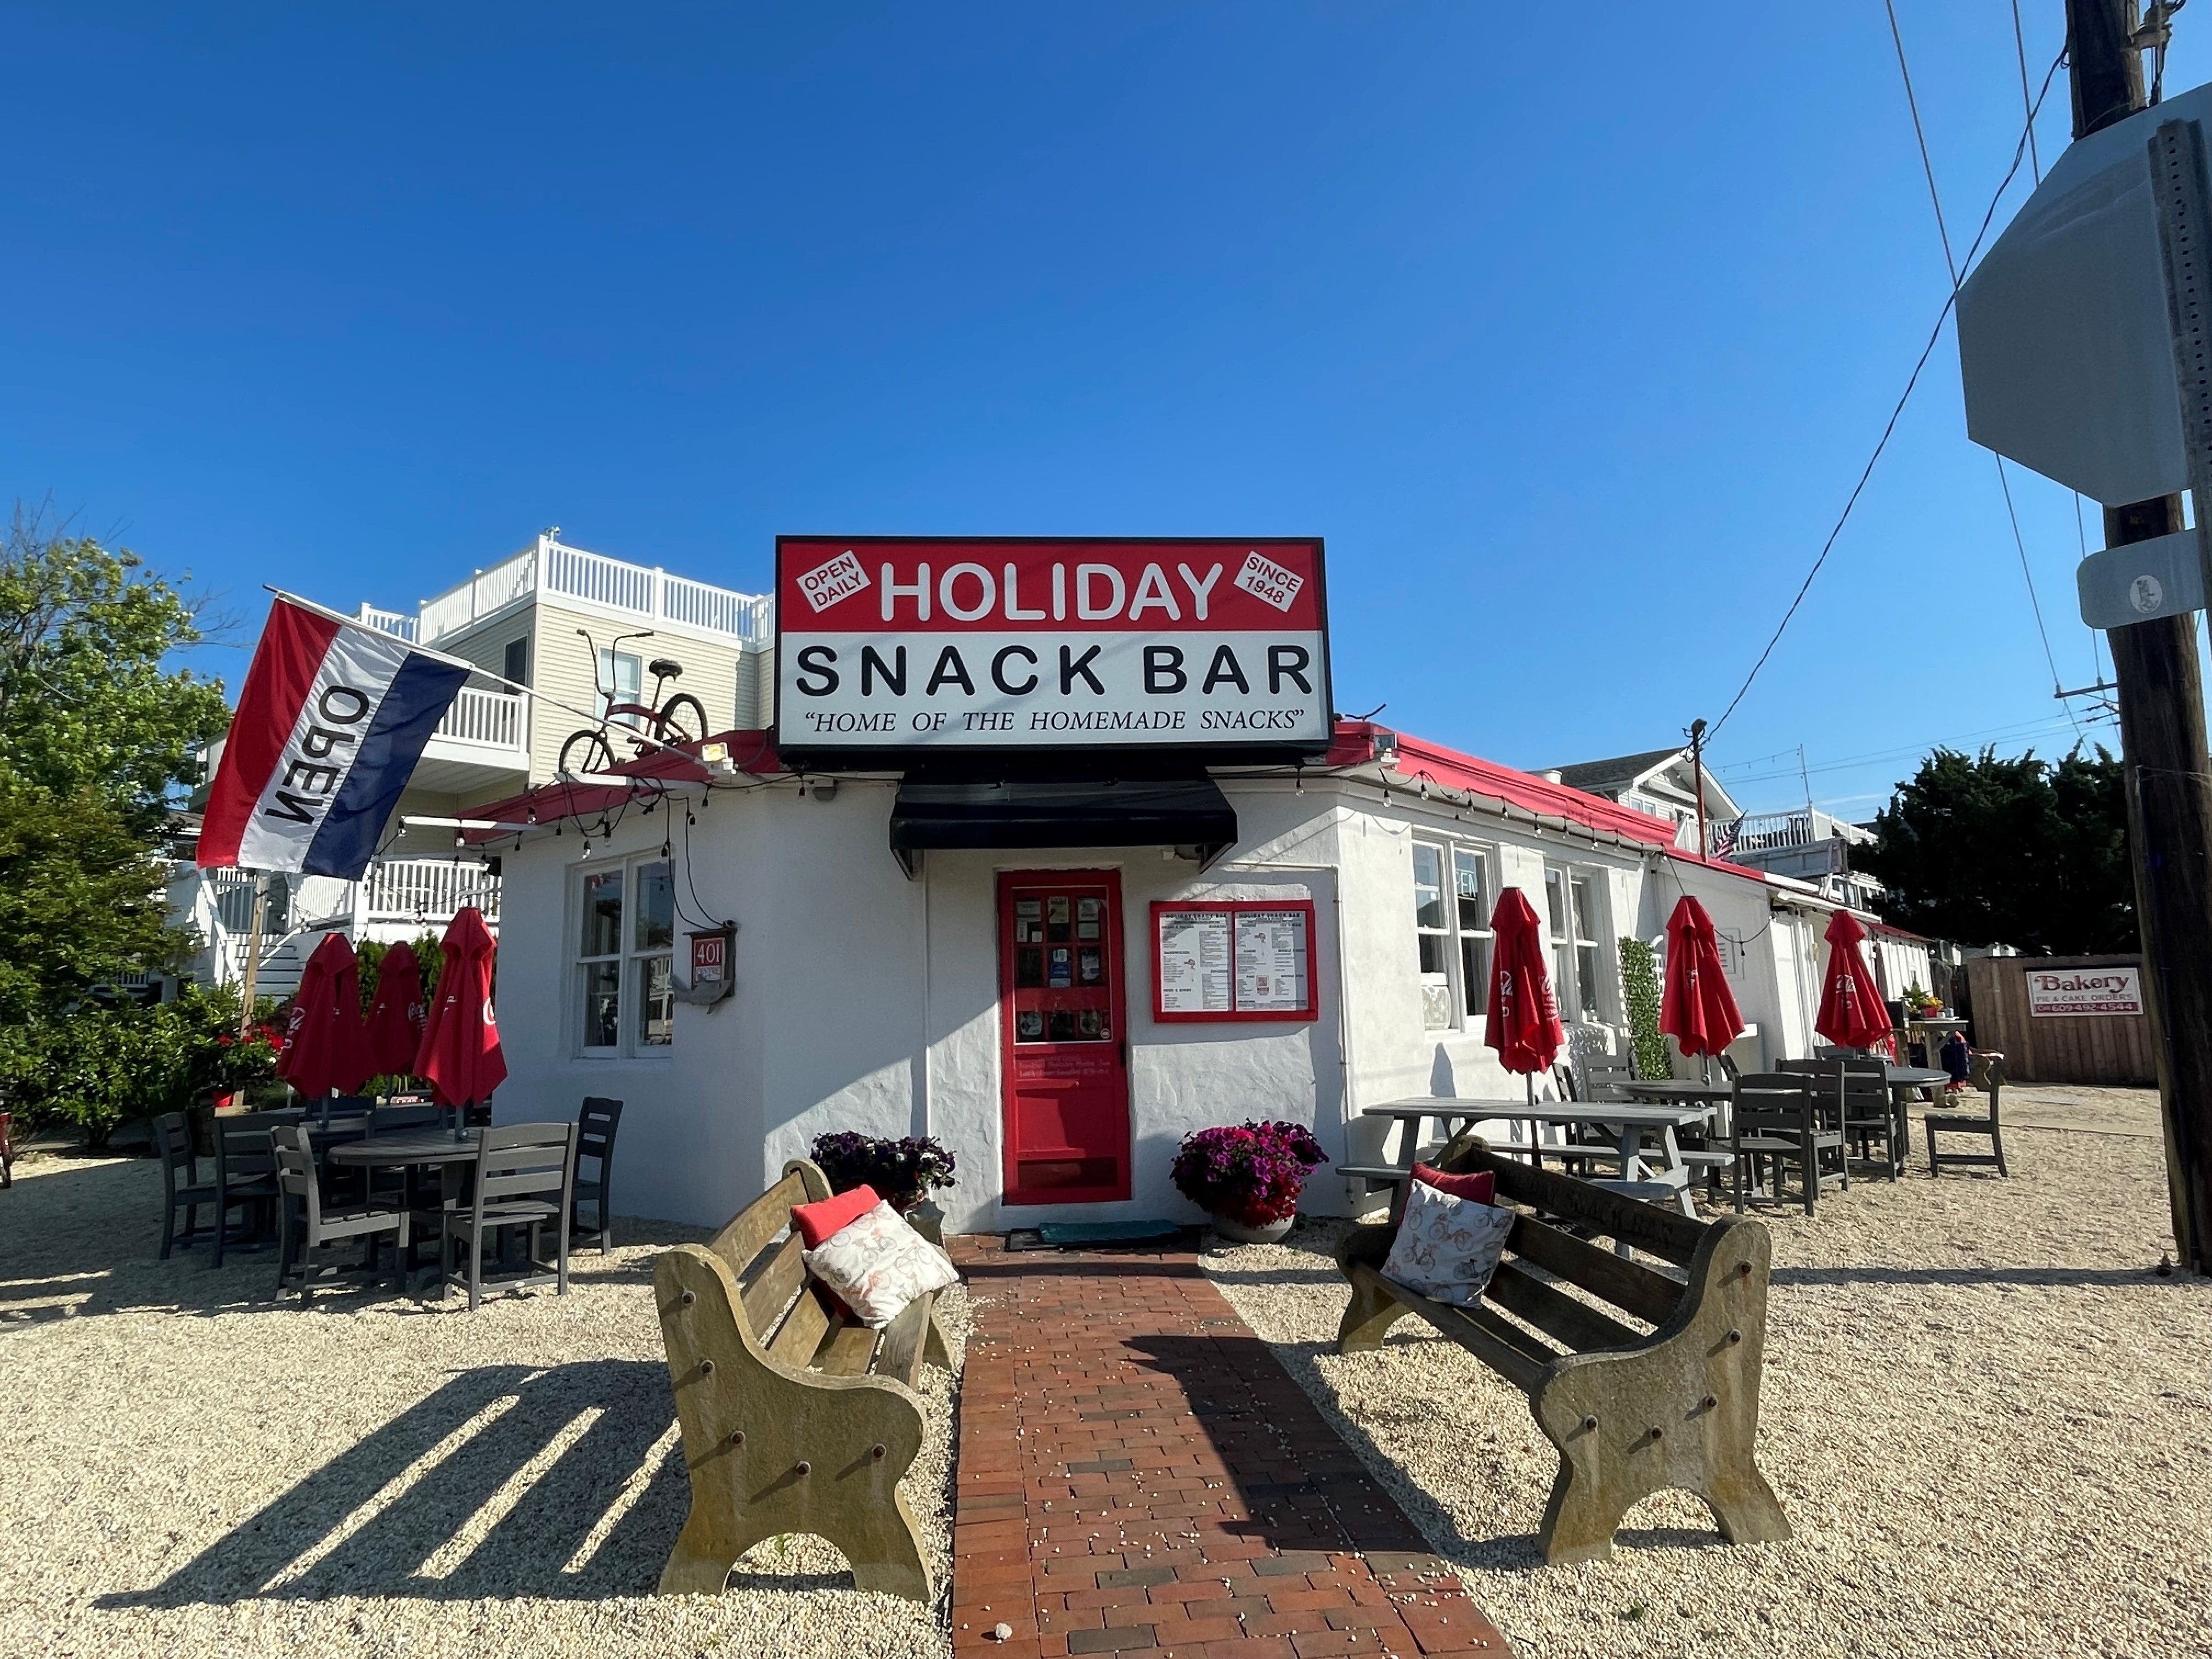 Holiday Snack Bar, borough of Beach Haven reach agreement on outdoor dining